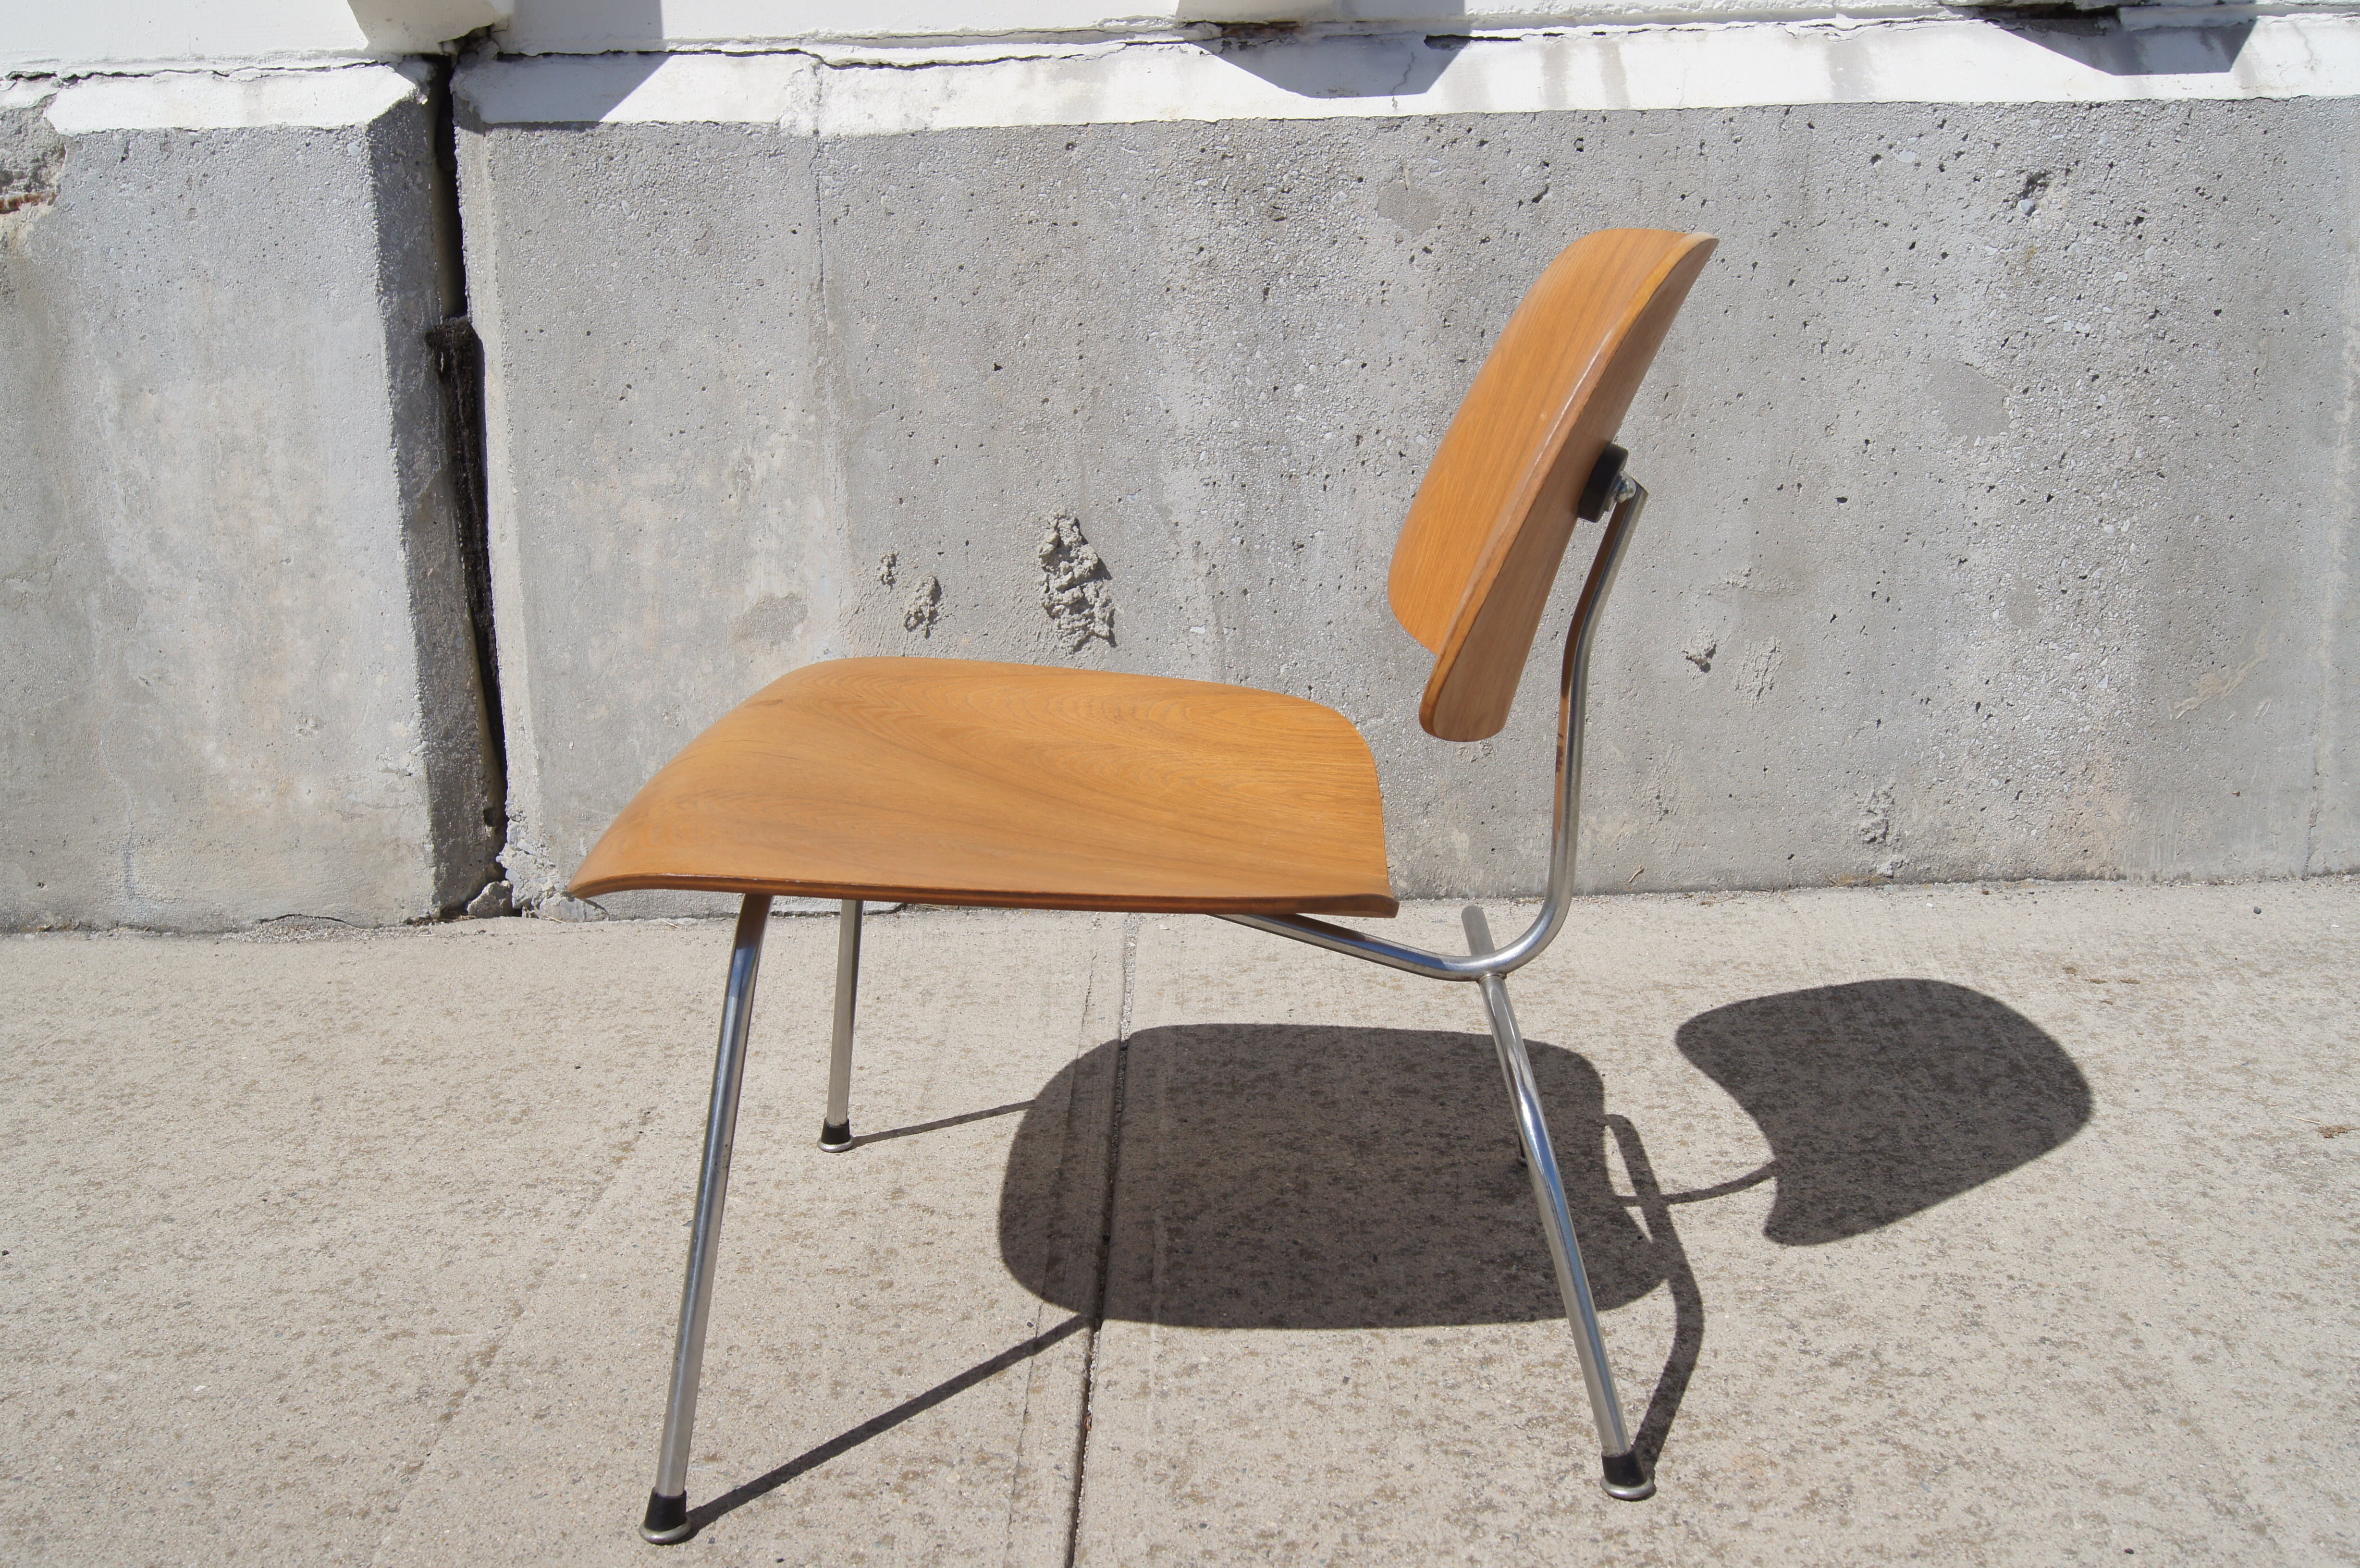 This early 1950s Herman Miller production of Charles and Ray Eames's classic bent plywood LCM chair, in oak and chrome, has all the original parts and is in very good vintage condition.